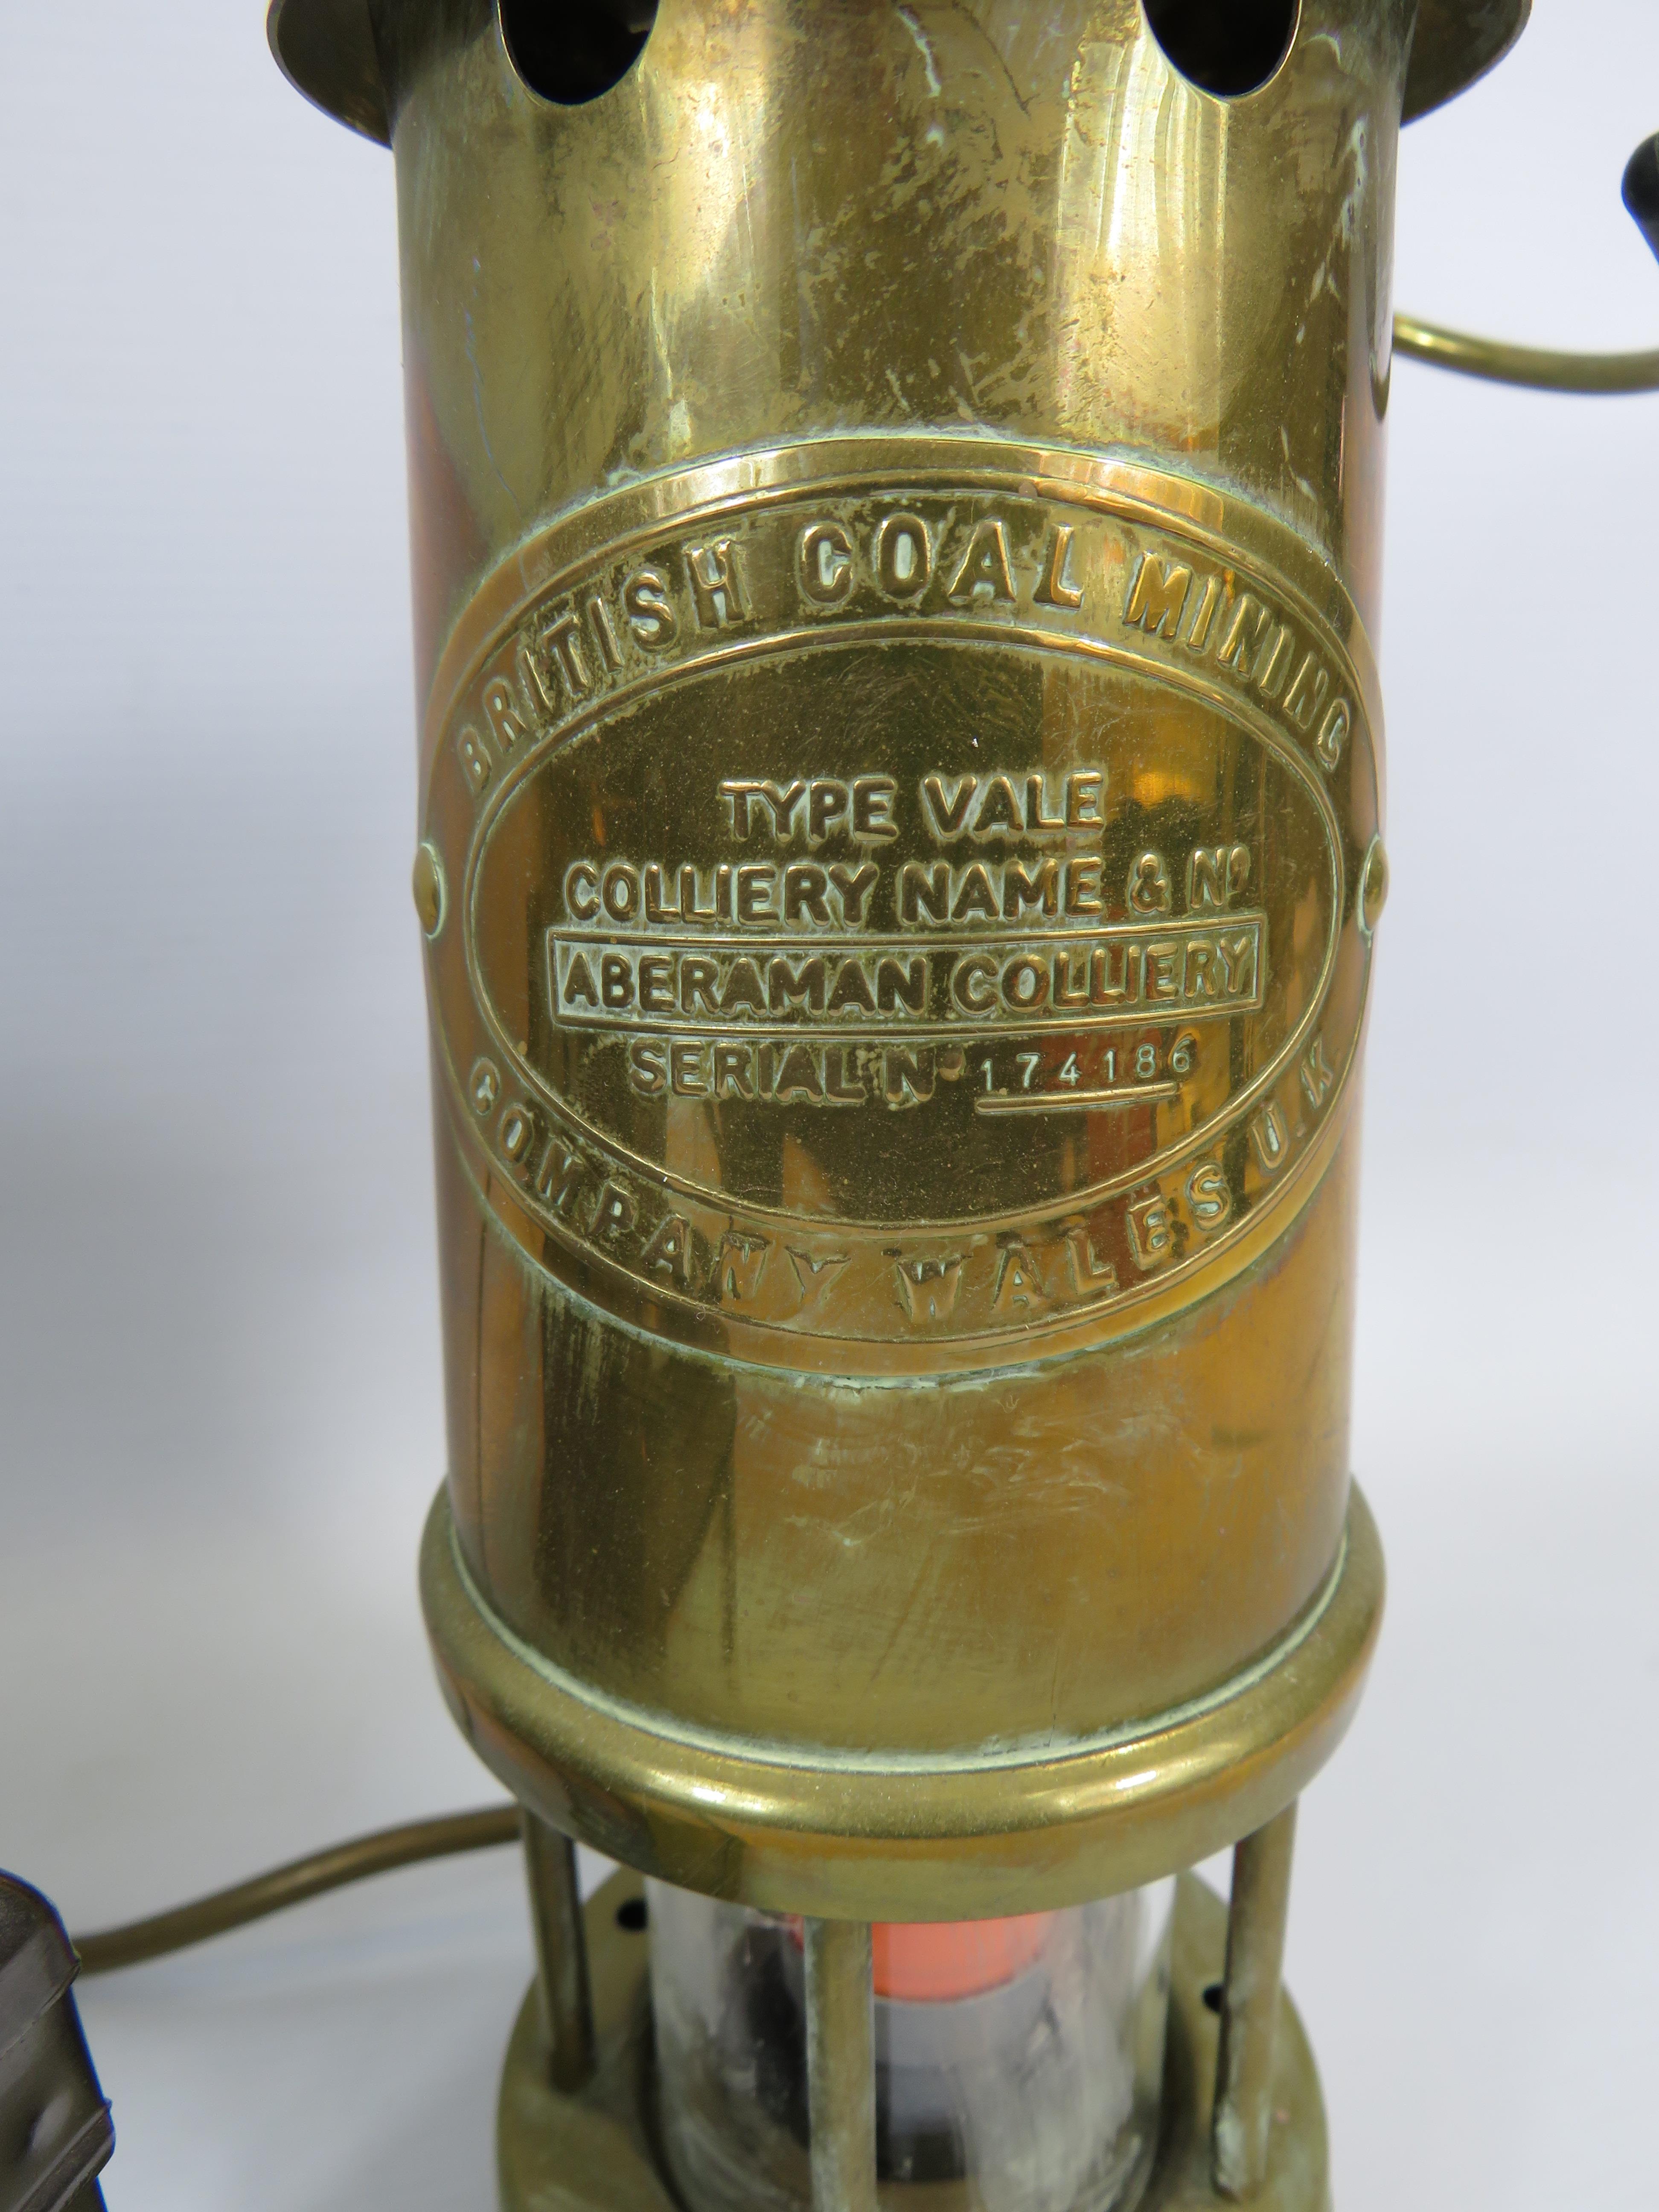 British Coal Mining Type Vale converted to electric lamp, a brass storm lantern and a tea light - Image 2 of 3